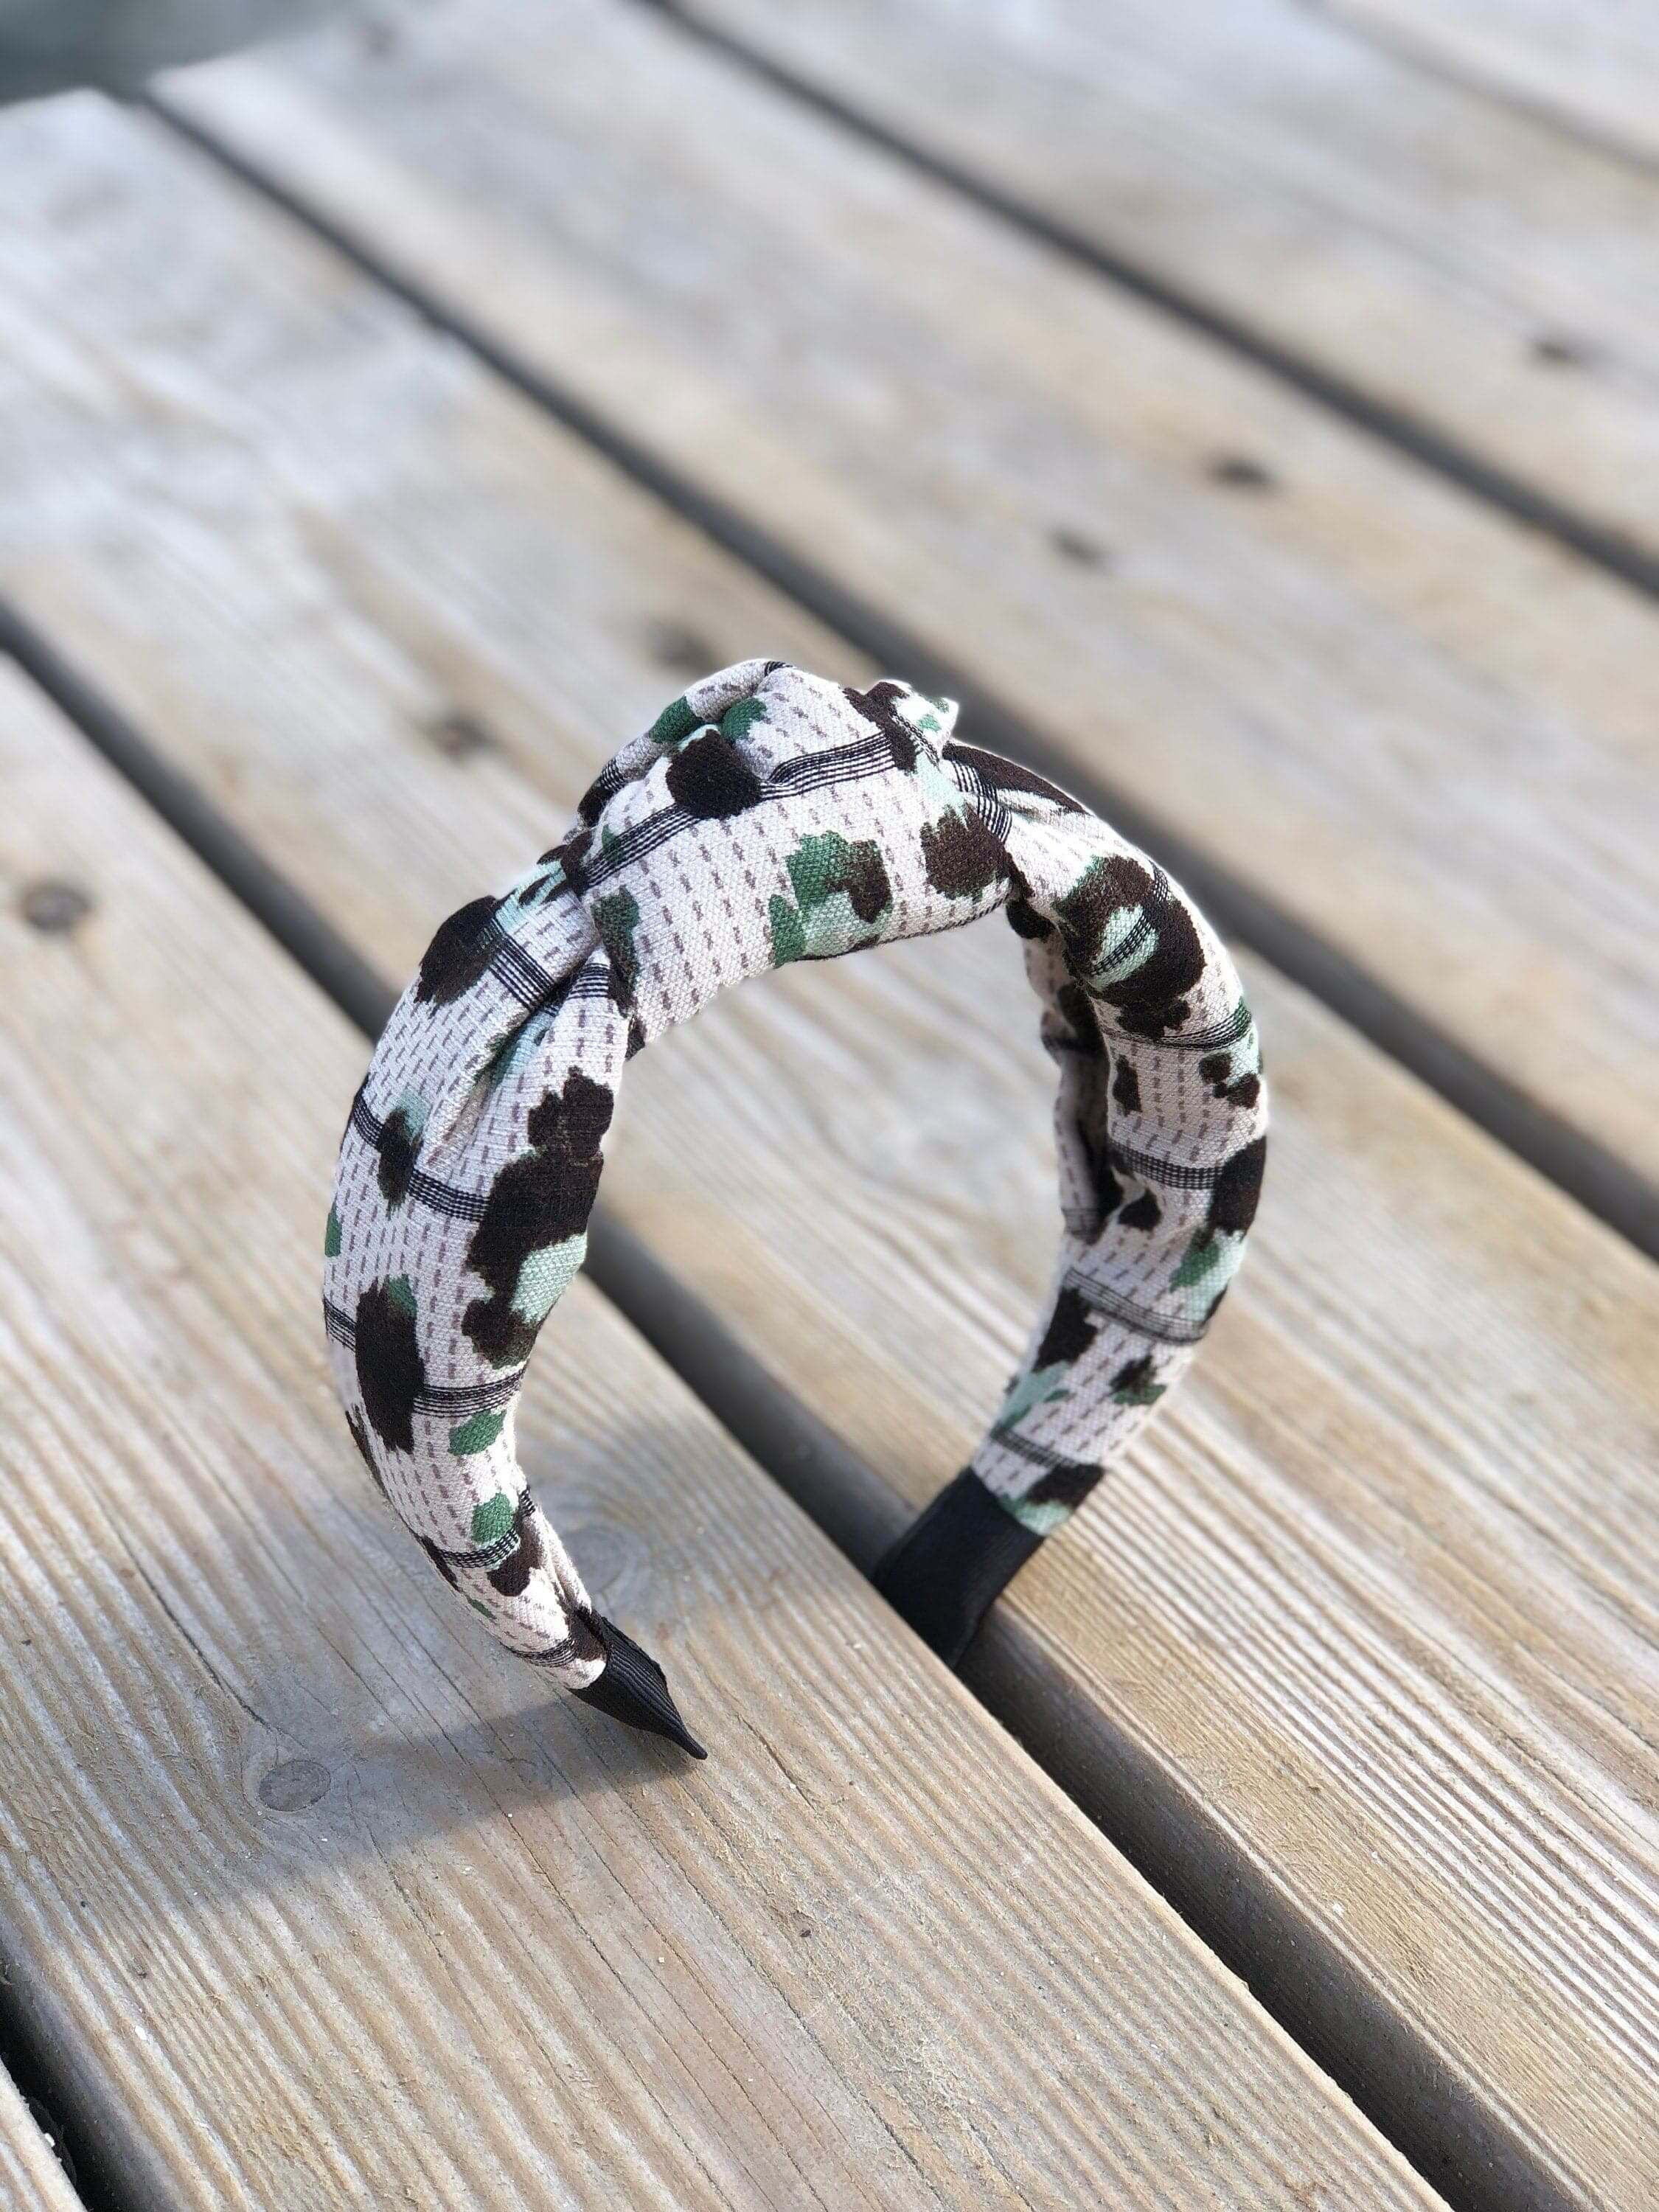 If you are looking for a stylish and trendy hair accessory, then this leopard headband is perfect for you! It comes in a variety of colors and patterns and is adjustable to fit any head size.